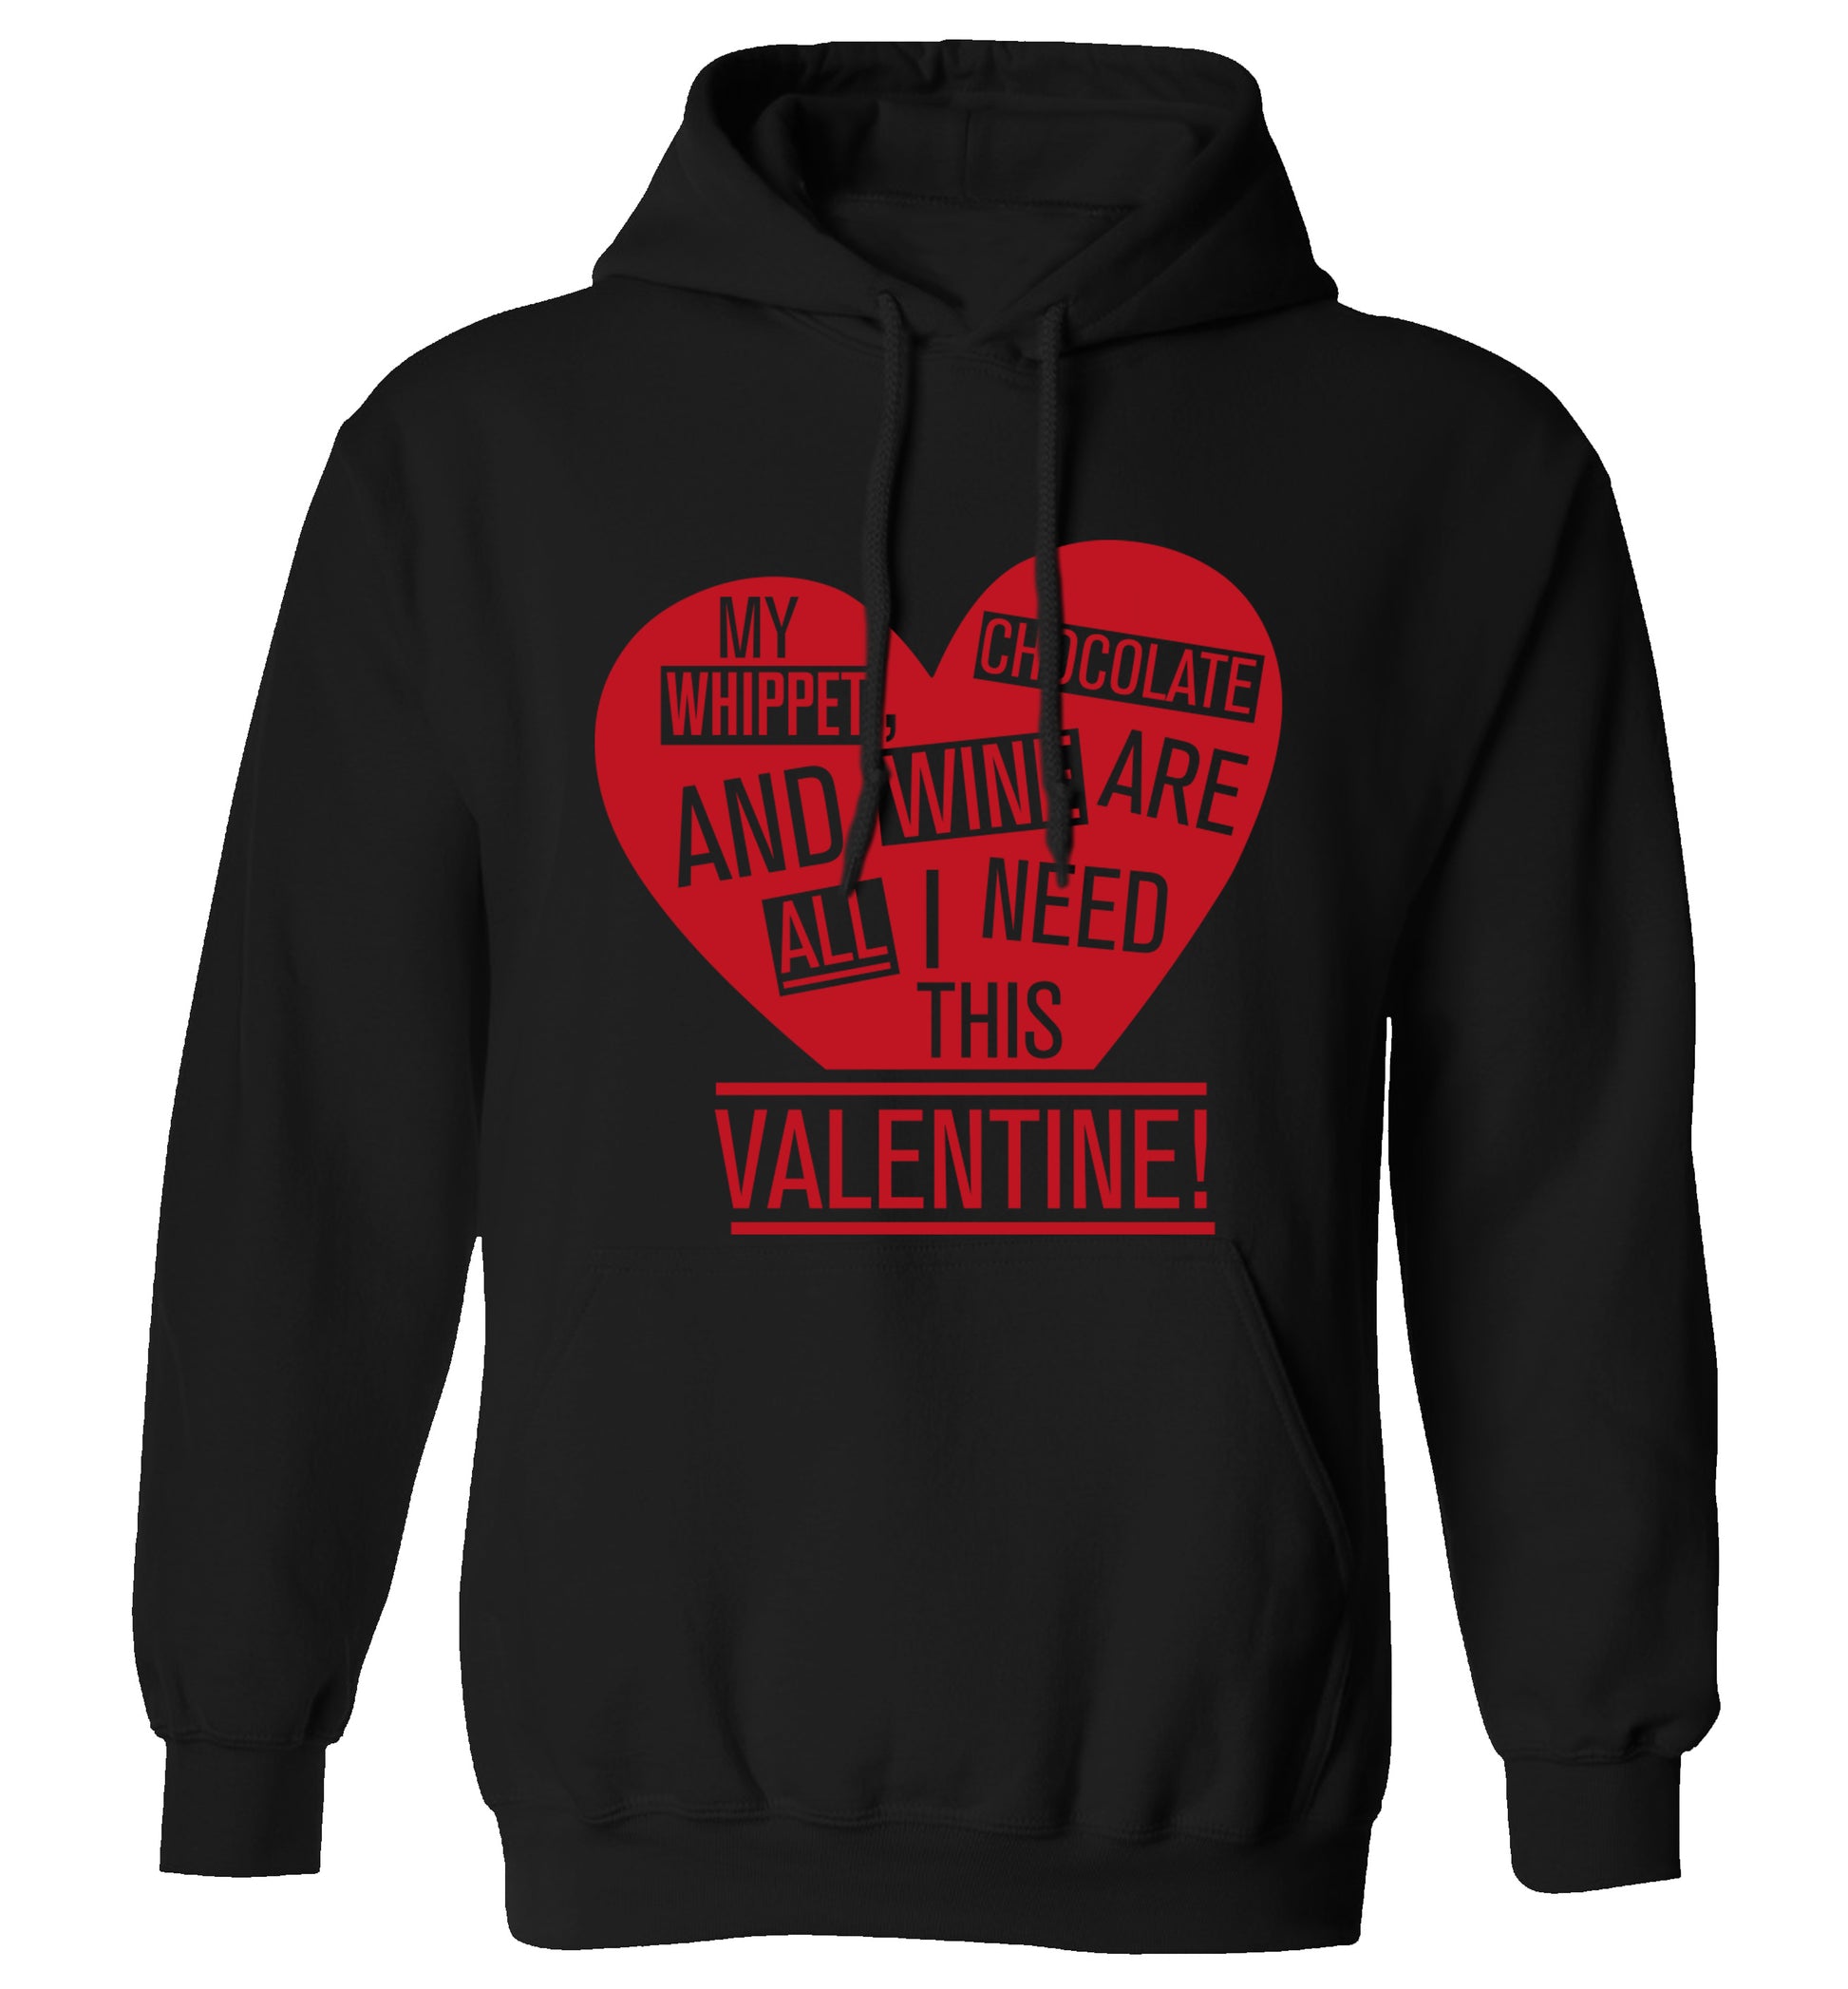 My whippet, chocolate and wine are all I need this valentine! adults unisex black hoodie 2XL